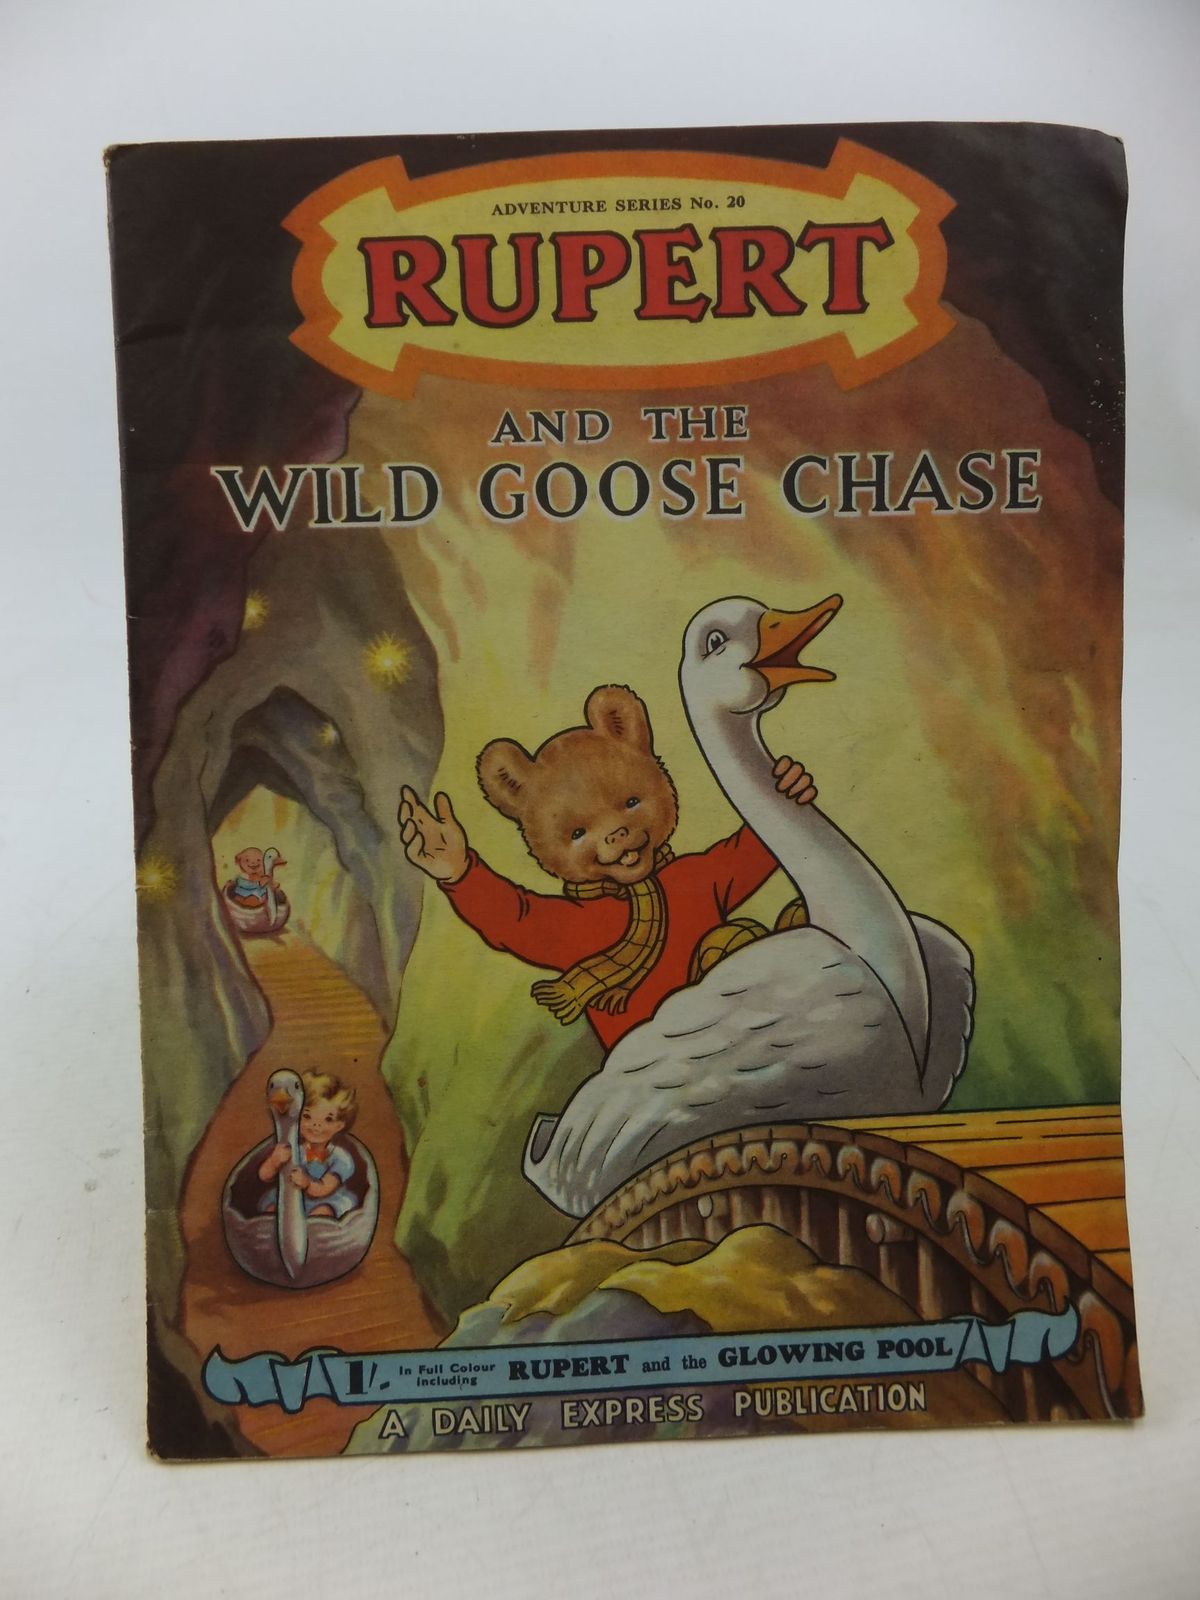 Photo of RUPERT ADVENTURE SERIES No. 20 - RUPERT AND THE WILD GOOSE CHASE written by Bestall, Alfred illustrated by Bestall, Alfred published by Daily Express (STOCK CODE: 2114201)  for sale by Stella & Rose's Books